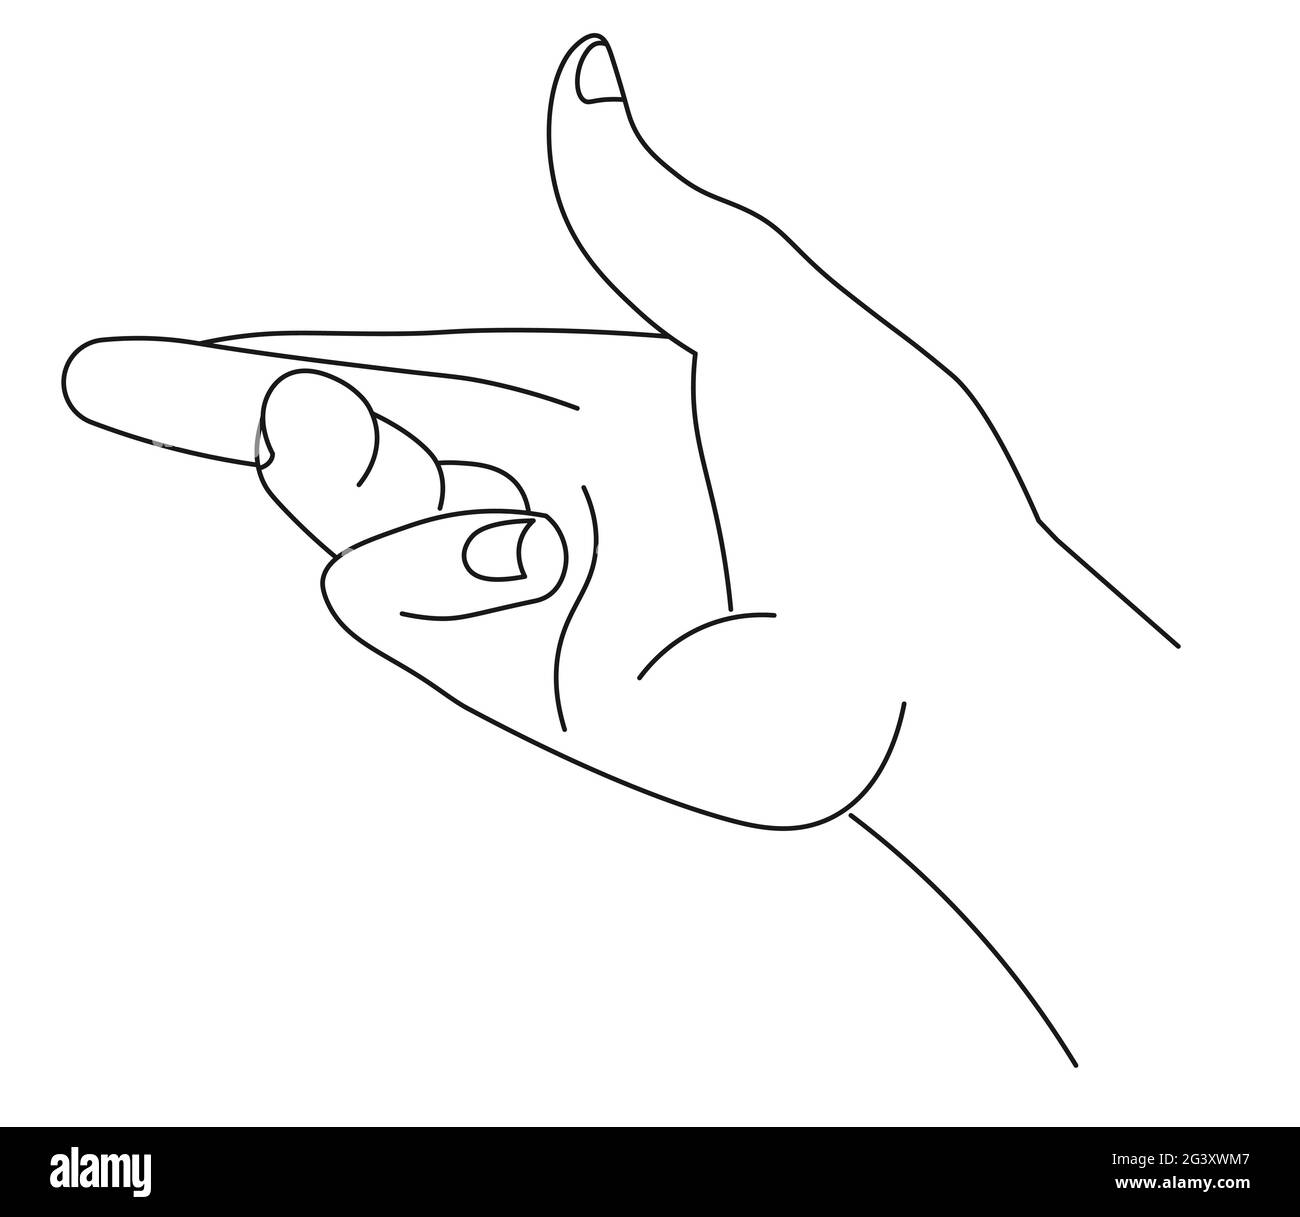 Female hand taking or giving sign gesture line Stock Vector